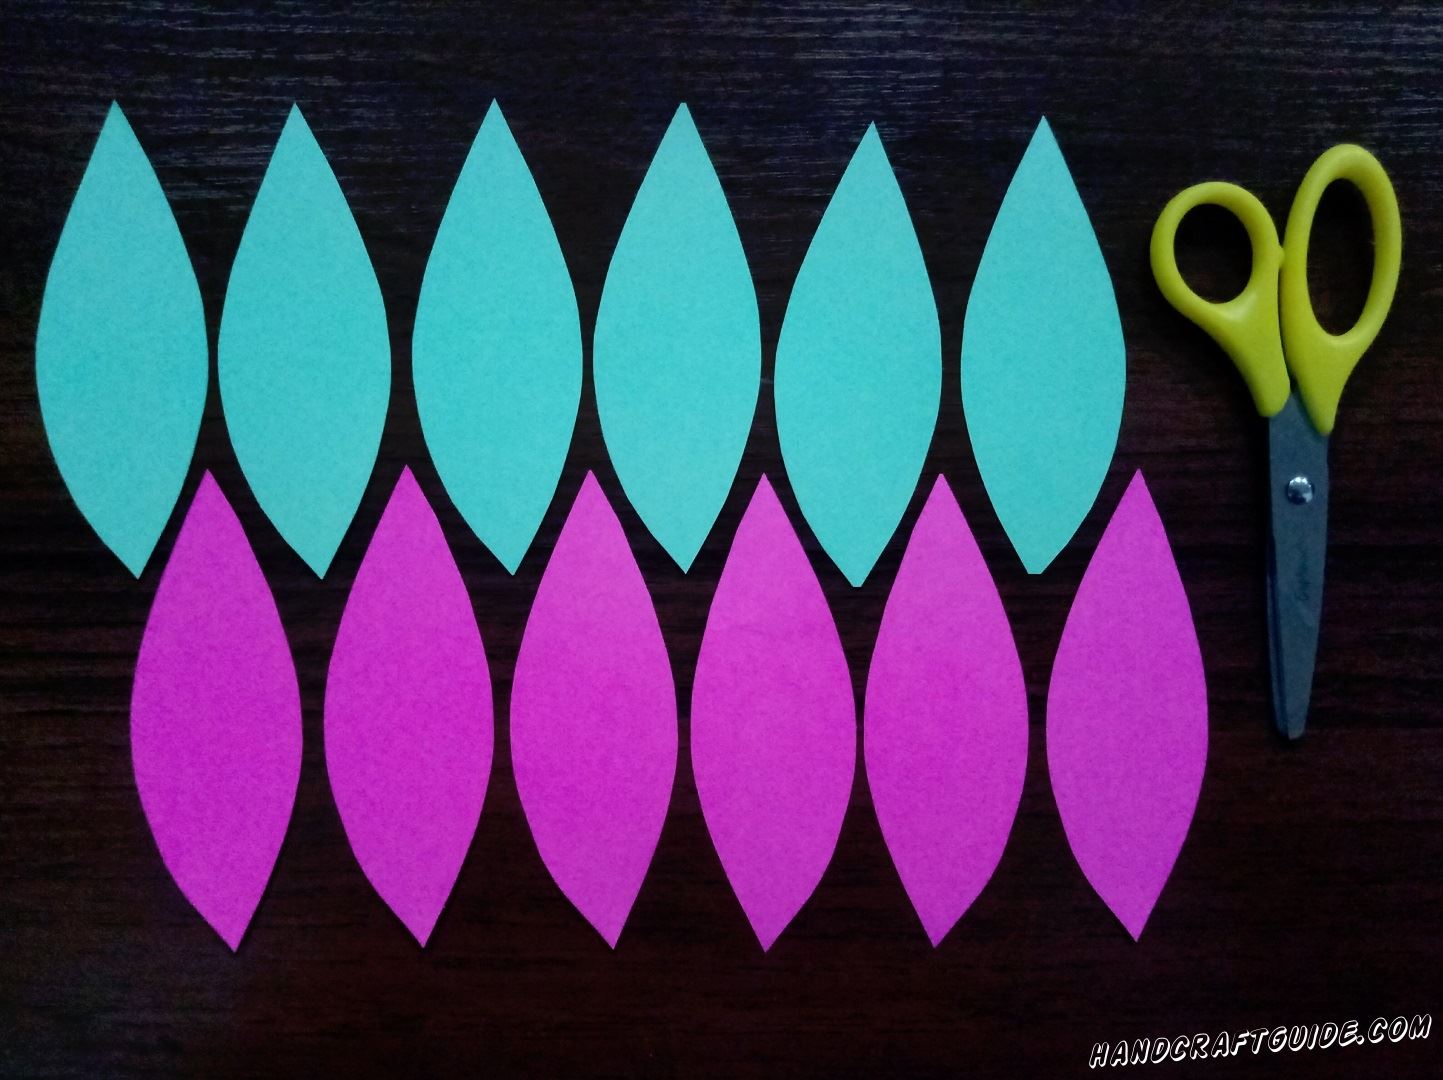 First let's take turquoise paper and cut out 6 identical petals. Do the same with purple paper. 